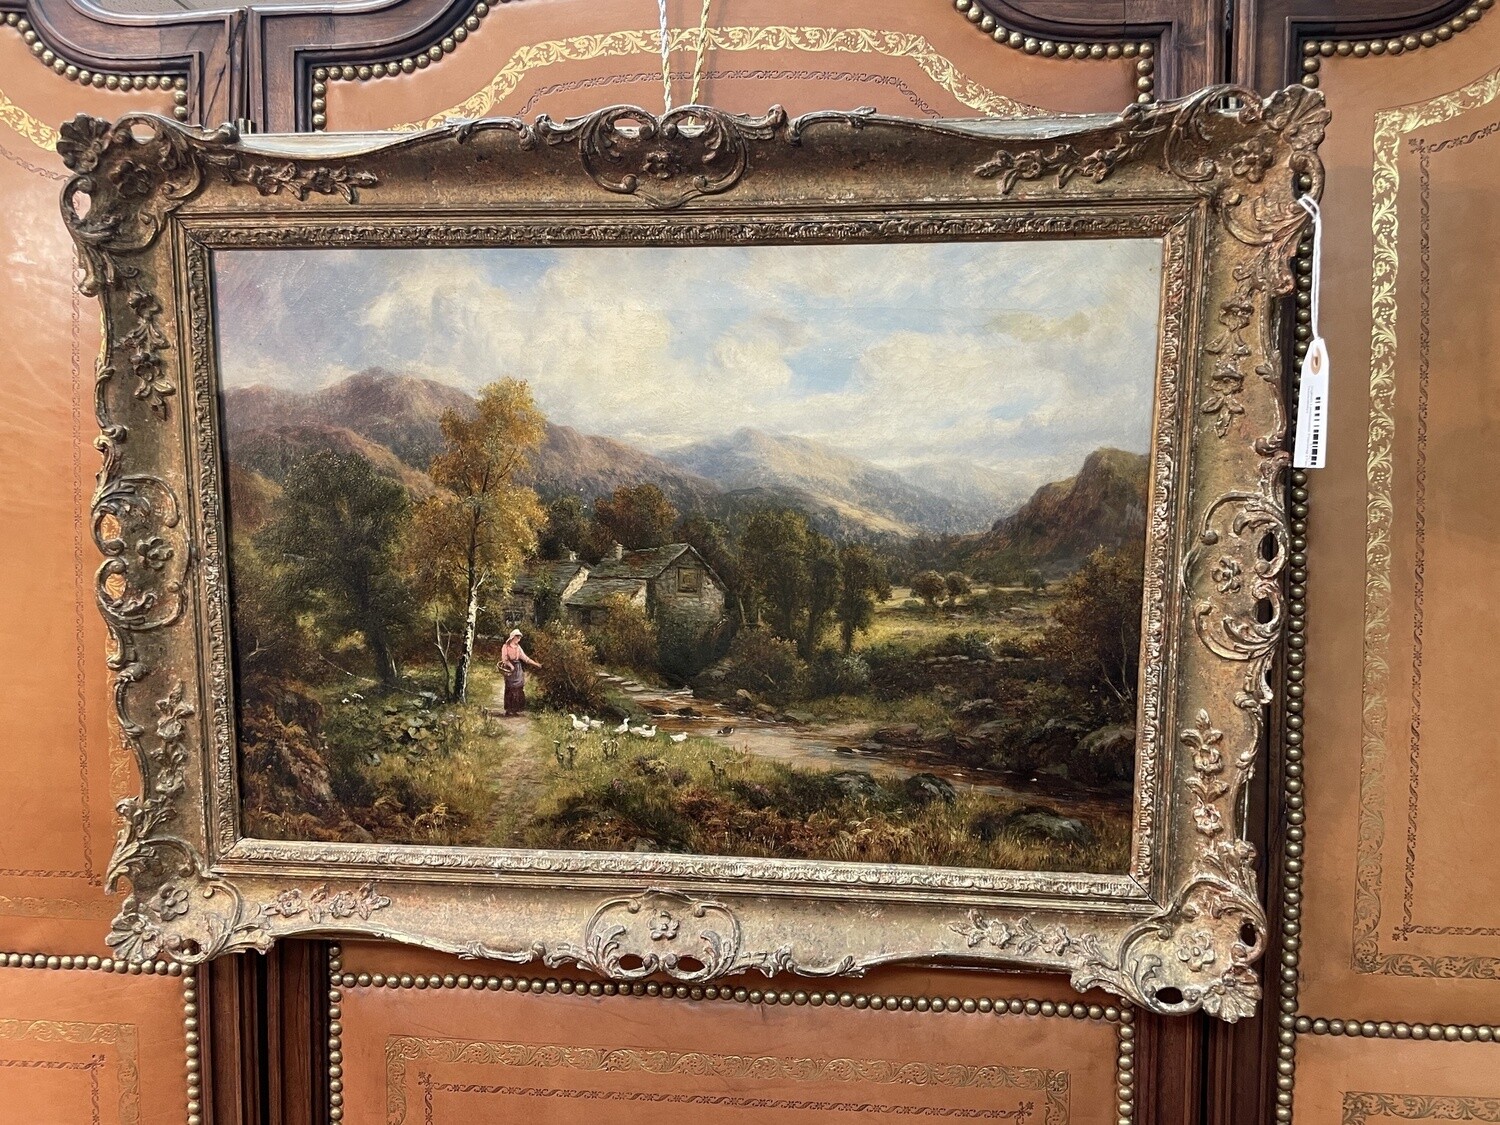 English Landscape Painting (Two, Sold Separately)